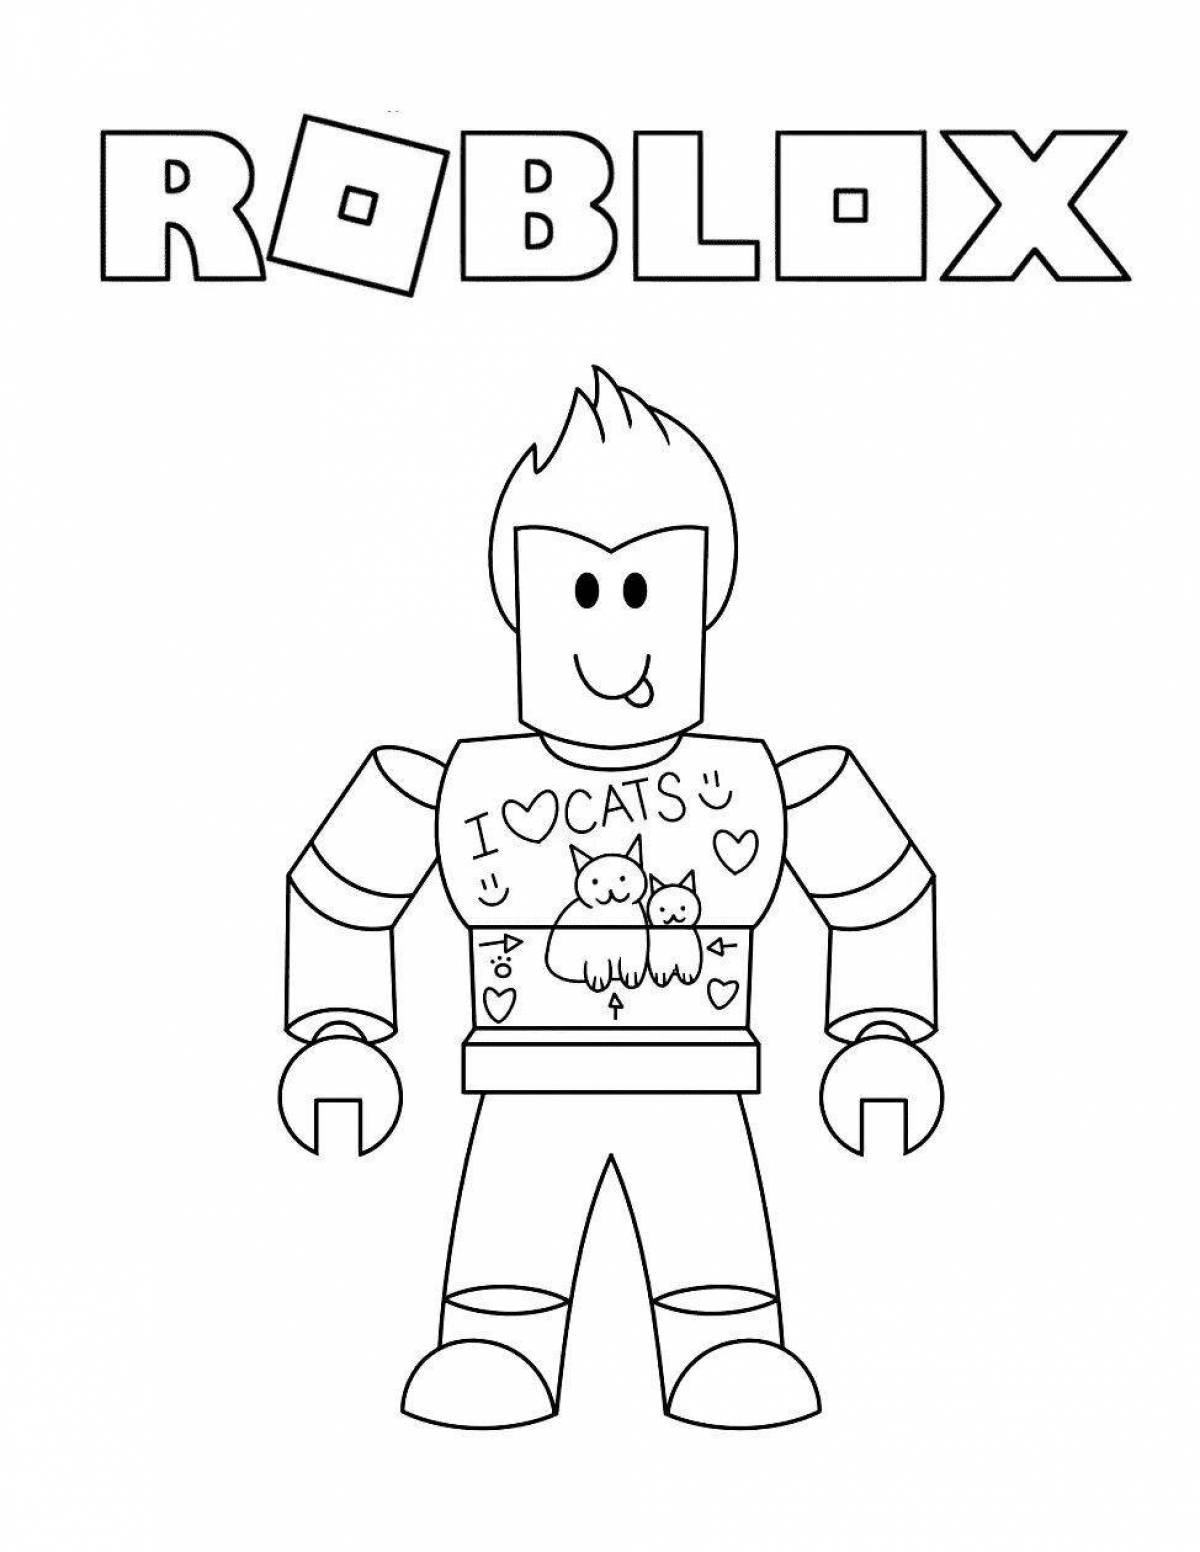 Roblox awesome coloring book